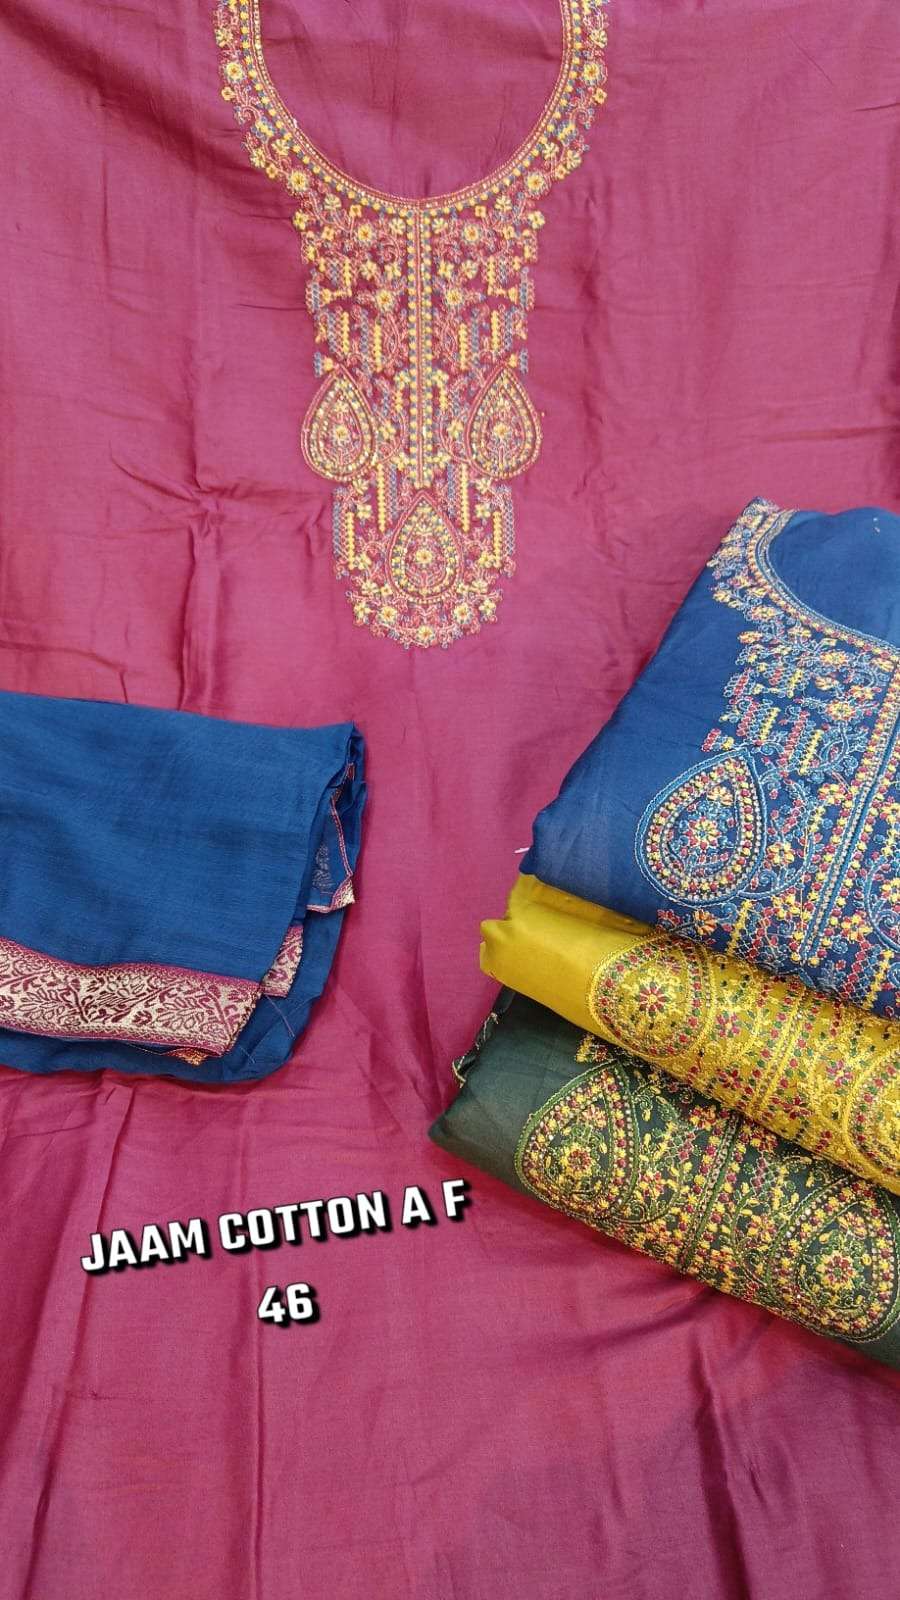 NFS suits - Fabric Top jaam cotton suit 5mtr Embodiery... | Facebook